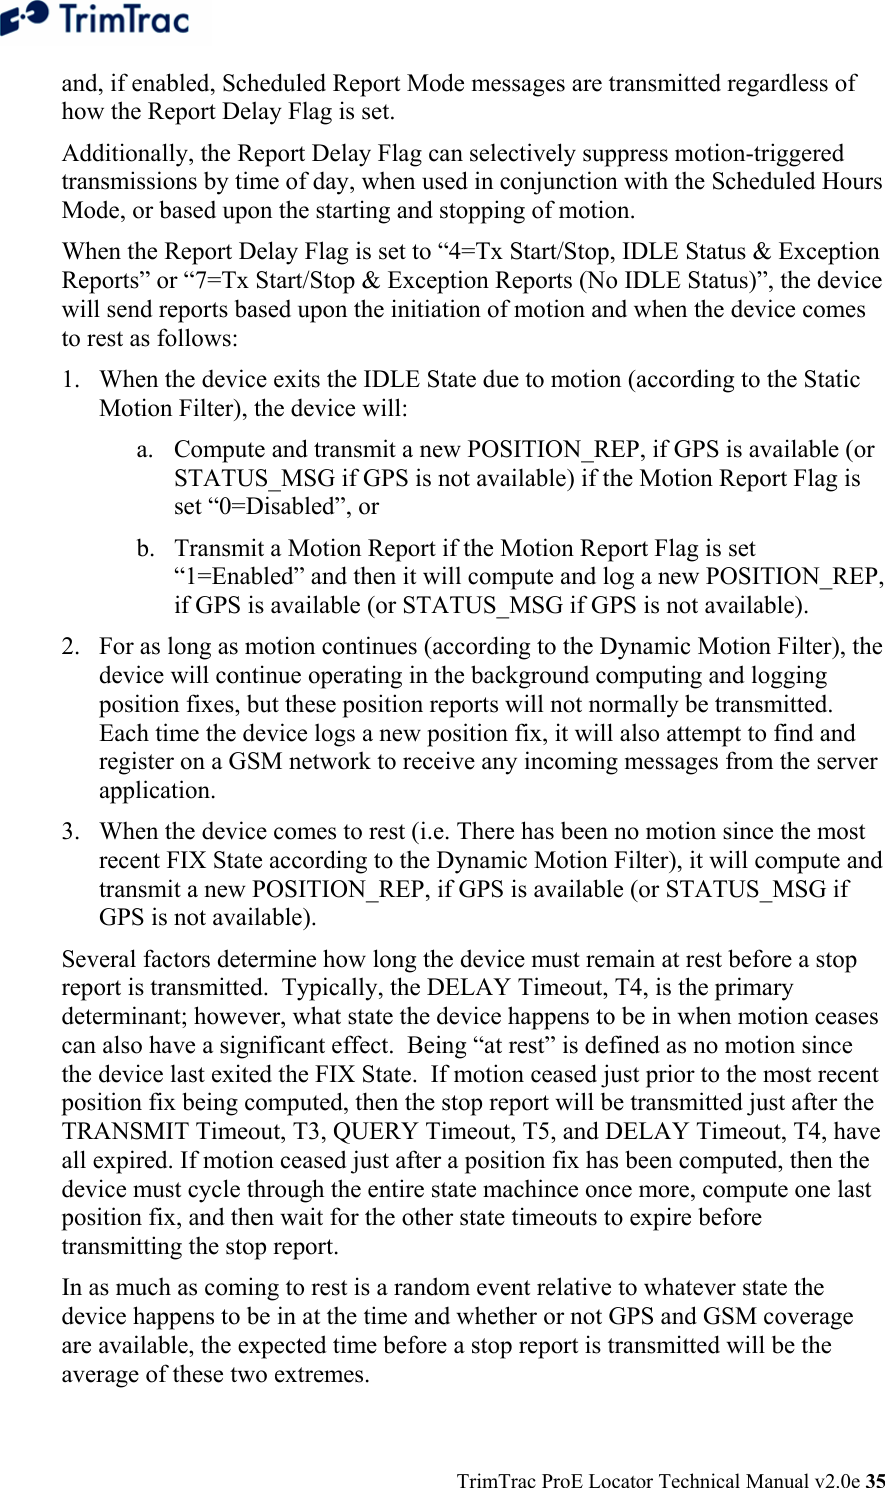  TrimTrac ProE Locator Technical Manual v2.0e 35 and, if enabled, Scheduled Report Mode messages are transmitted regardless of how the Report Delay Flag is set. Additionally, the Report Delay Flag can selectively suppress motion-triggered transmissions by time of day, when used in conjunction with the Scheduled Hours Mode, or based upon the starting and stopping of motion.   When the Report Delay Flag is set to “4=Tx Start/Stop, IDLE Status &amp; Exception Reports” or “7=Tx Start/Stop &amp; Exception Reports (No IDLE Status)”, the device will send reports based upon the initiation of motion and when the device comes to rest as follows: 1. When the device exits the IDLE State due to motion (according to the Static Motion Filter), the device will: a. Compute and transmit a new POSITION_REP, if GPS is available (or STATUS_MSG if GPS is not available) if the Motion Report Flag is set “0=Disabled”, or b. Transmit a Motion Report if the Motion Report Flag is set “1=Enabled” and then it will compute and log a new POSITION_REP, if GPS is available (or STATUS_MSG if GPS is not available). 2. For as long as motion continues (according to the Dynamic Motion Filter), the device will continue operating in the background computing and logging position fixes, but these position reports will not normally be transmitted.  Each time the device logs a new position fix, it will also attempt to find and register on a GSM network to receive any incoming messages from the server application. 3. When the device comes to rest (i.e. There has been no motion since the most recent FIX State according to the Dynamic Motion Filter), it will compute and transmit a new POSITION_REP, if GPS is available (or STATUS_MSG if GPS is not available). Several factors determine how long the device must remain at rest before a stop report is transmitted.  Typically, the DELAY Timeout, T4, is the primary determinant; however, what state the device happens to be in when motion ceases can also have a significant effect.  Being “at rest” is defined as no motion since the device last exited the FIX State.  If motion ceased just prior to the most recent position fix being computed, then the stop report will be transmitted just after the TRANSMIT Timeout, T3, QUERY Timeout, T5, and DELAY Timeout, T4, have all expired. If motion ceased just after a position fix has been computed, then the device must cycle through the entire state machince once more, compute one last position fix, and then wait for the other state timeouts to expire before transmitting the stop report. In as much as coming to rest is a random event relative to whatever state the device happens to be in at the time and whether or not GPS and GSM coverage are available, the expected time before a stop report is transmitted will be the average of these two extremes. 